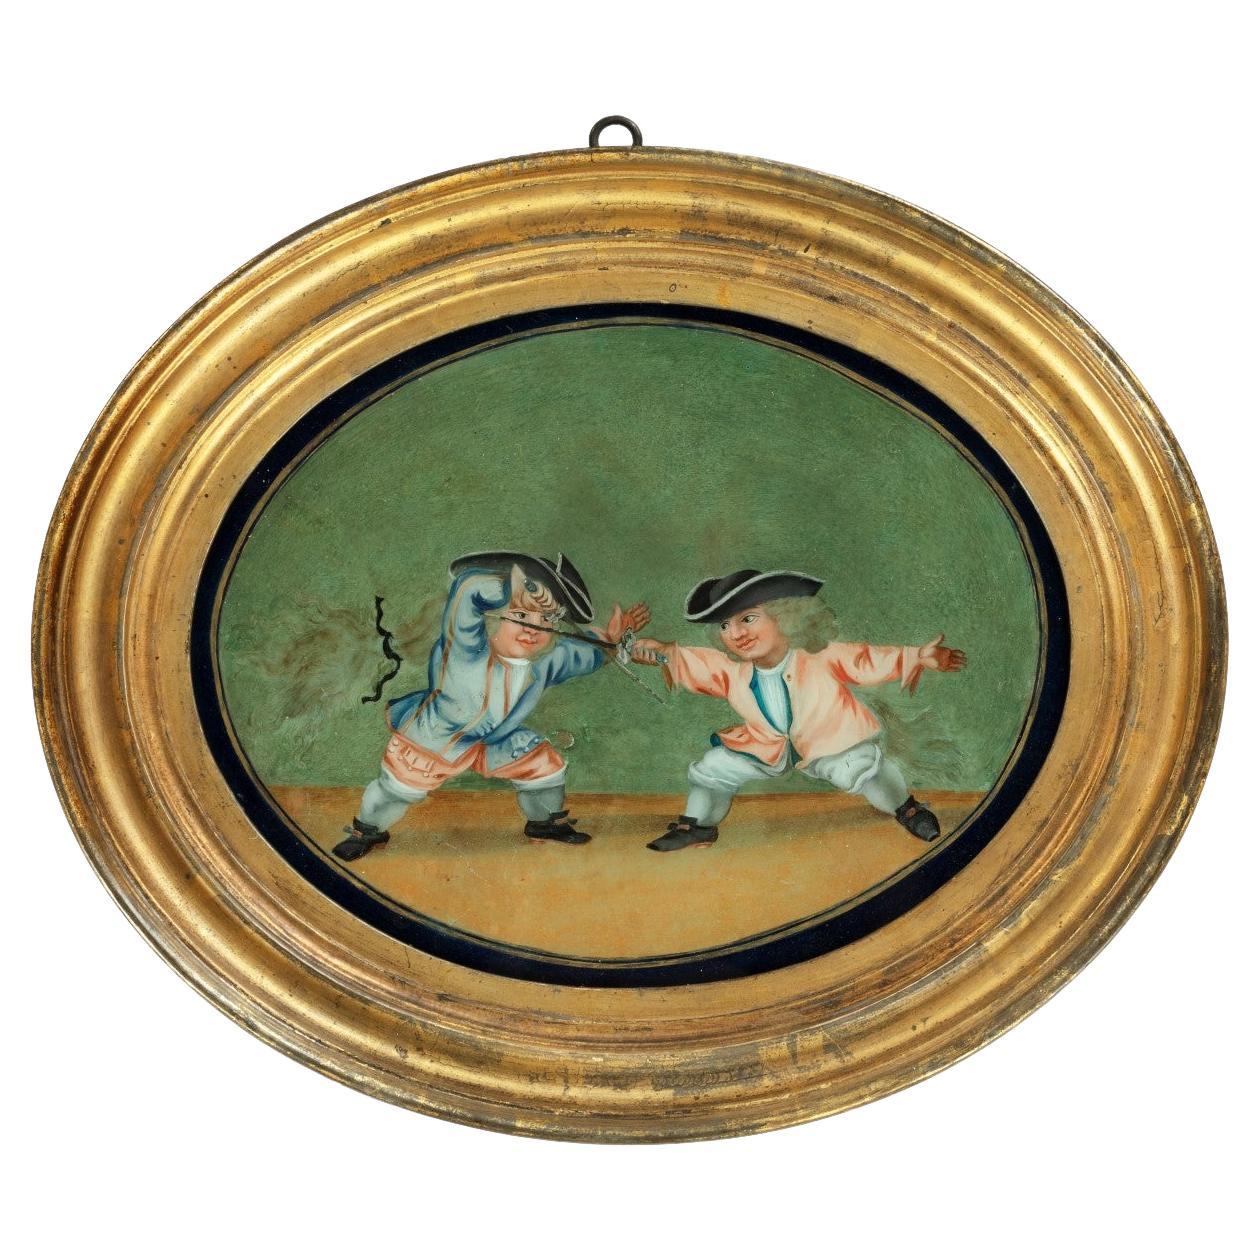 Pair of French Reverse Glass Paintings or Cartoons